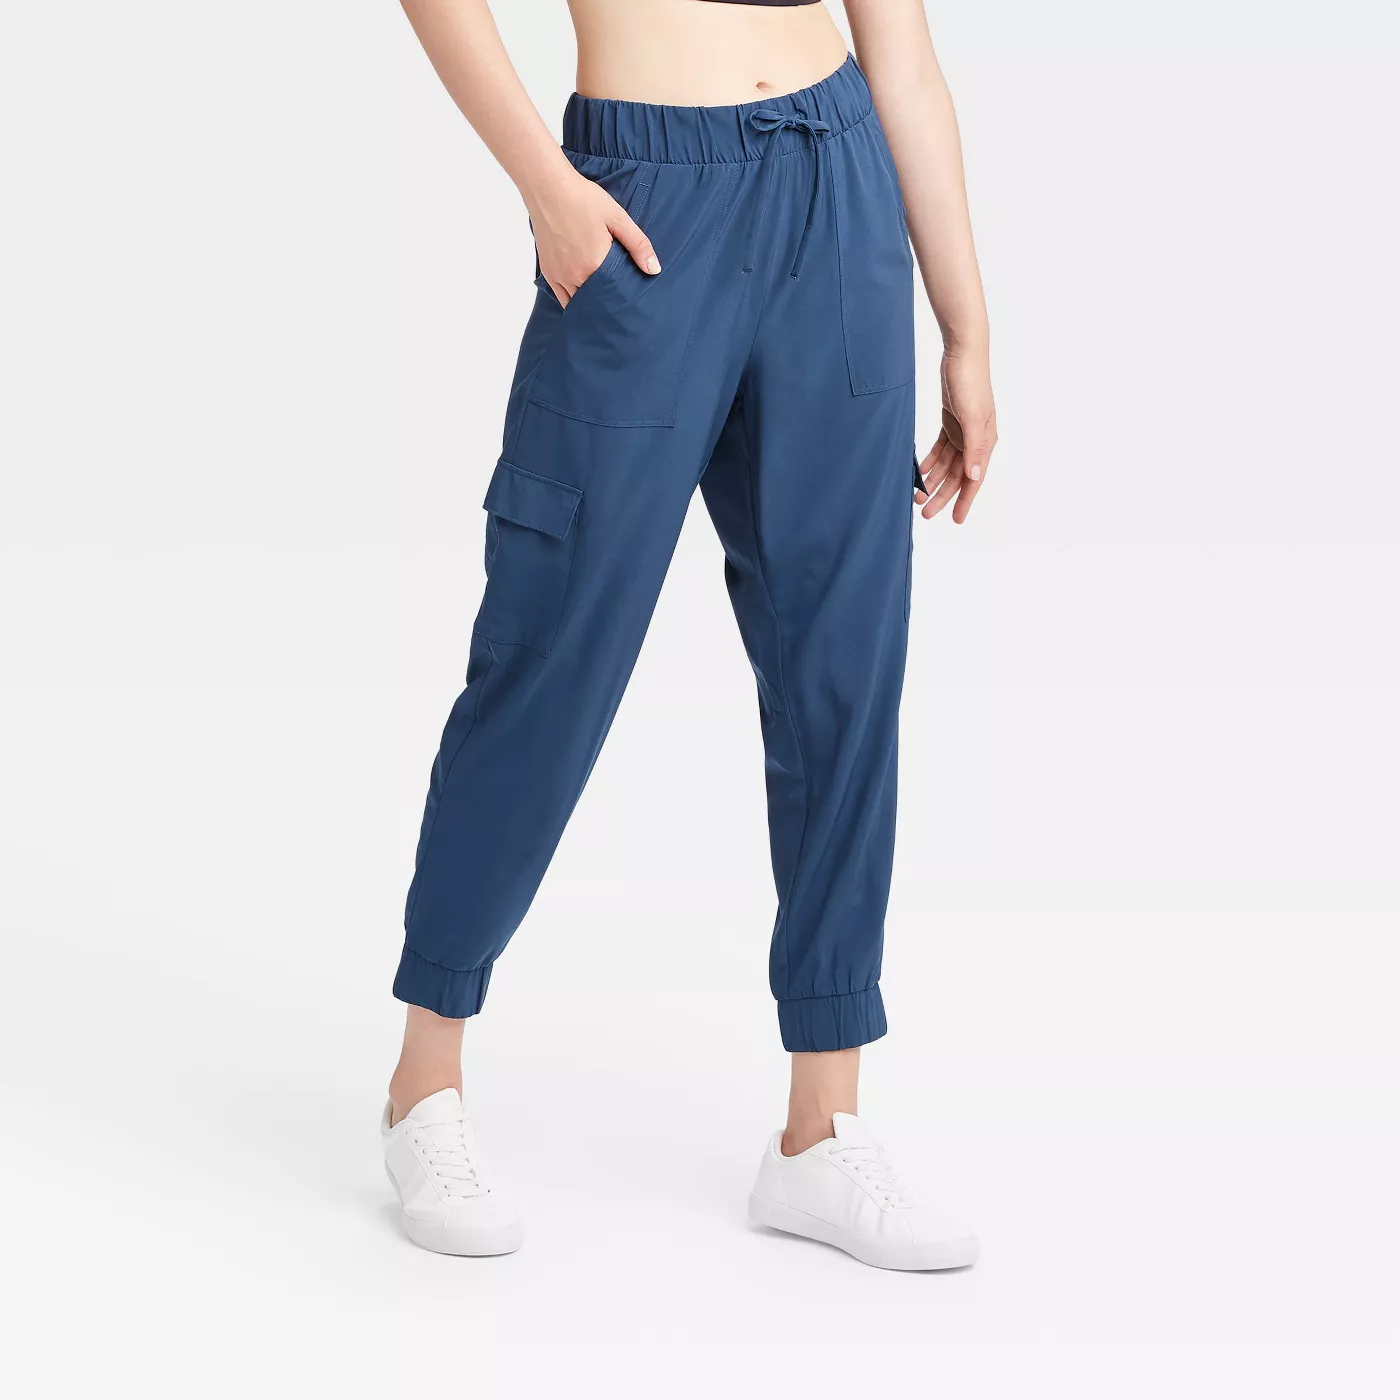 Women's Stretch Woven Cargo Joggers - All in Motion™ - image 1 of 8